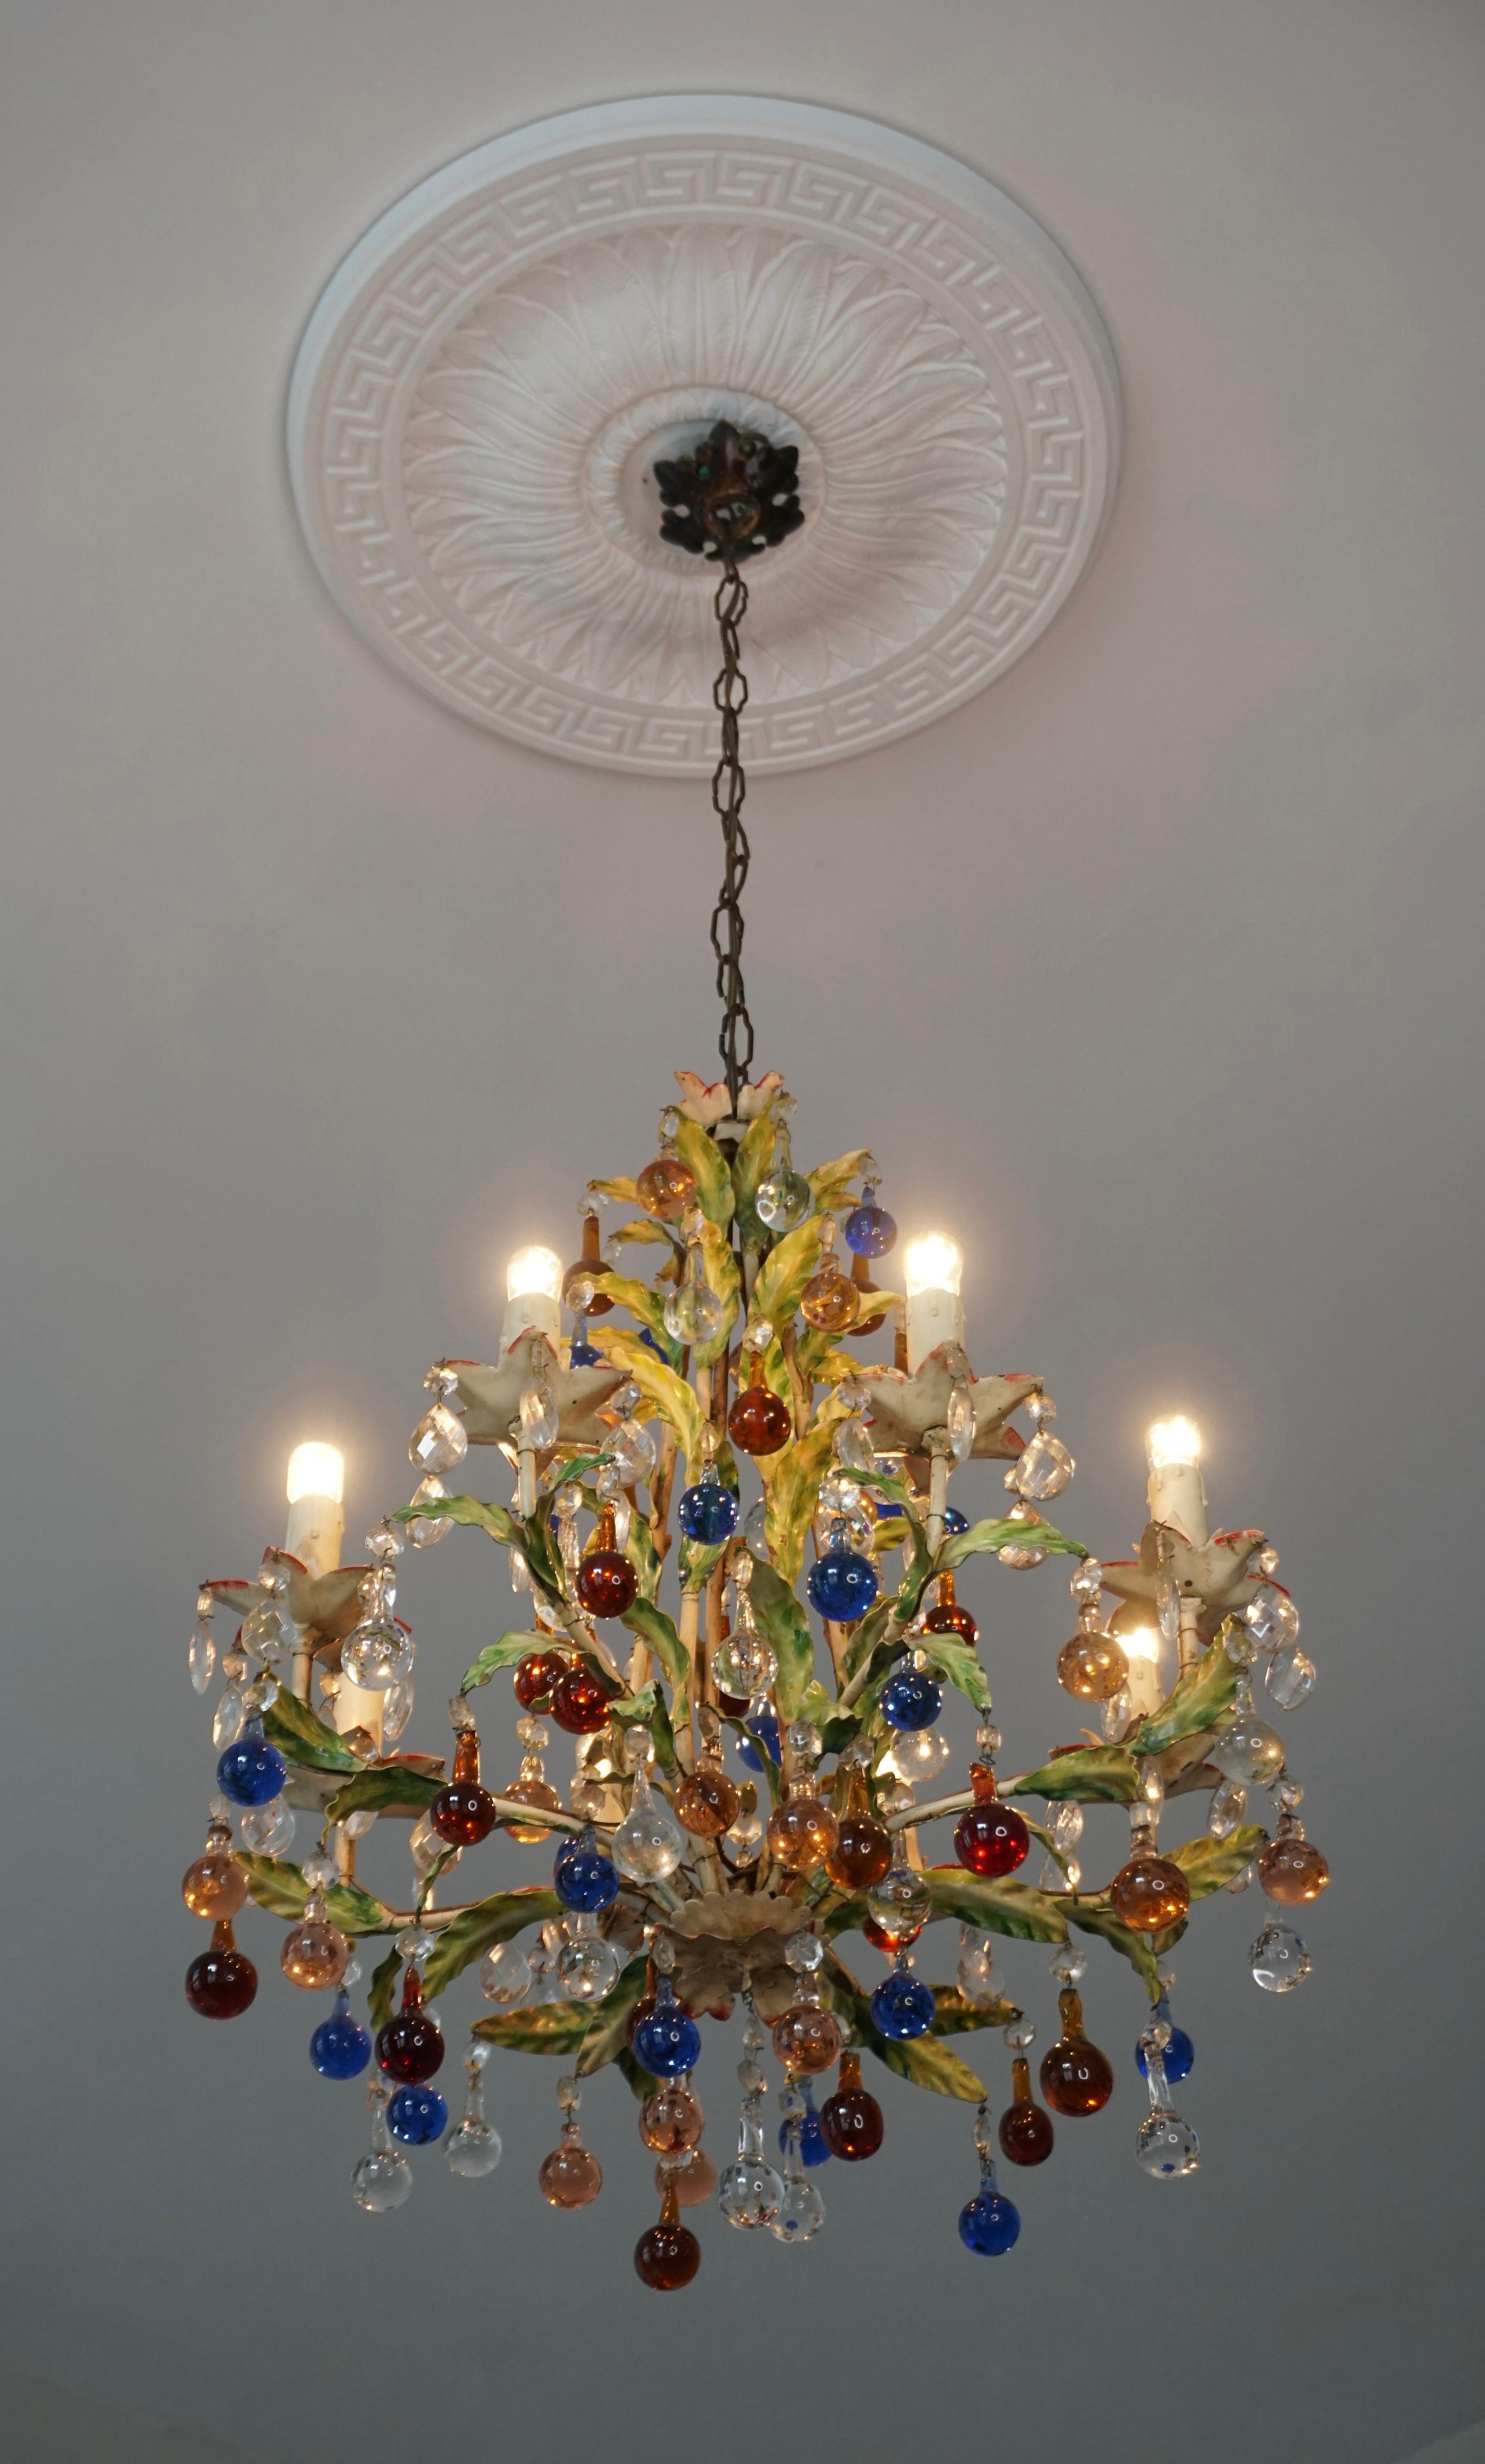 Hollywood Regency Italian Venetian Painted Metal Eight-Light Chandelier with Murano Glass For Sale